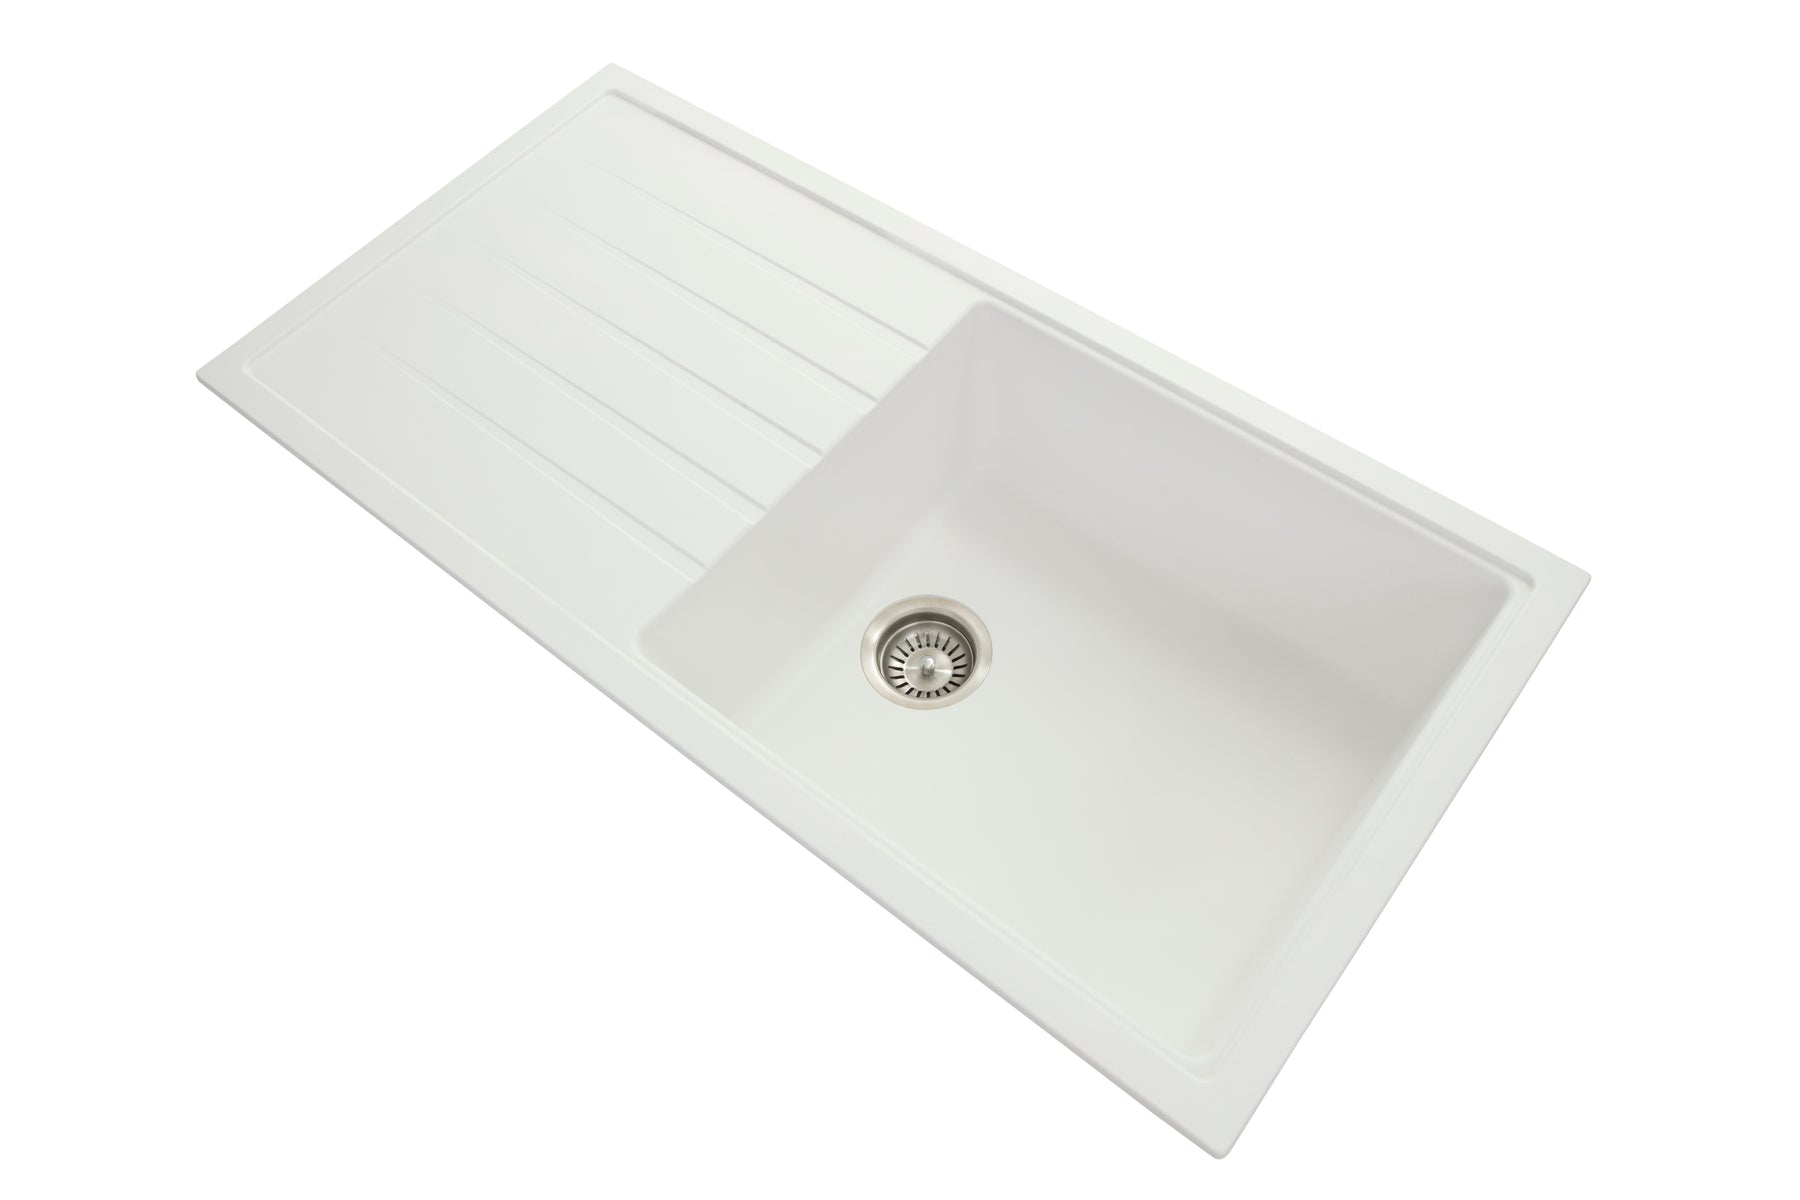 1000 x 500 x 220mm Carysil White Single Bowl With Drainer Board Granite Kitchen Sink Top/Flush/Under Mount